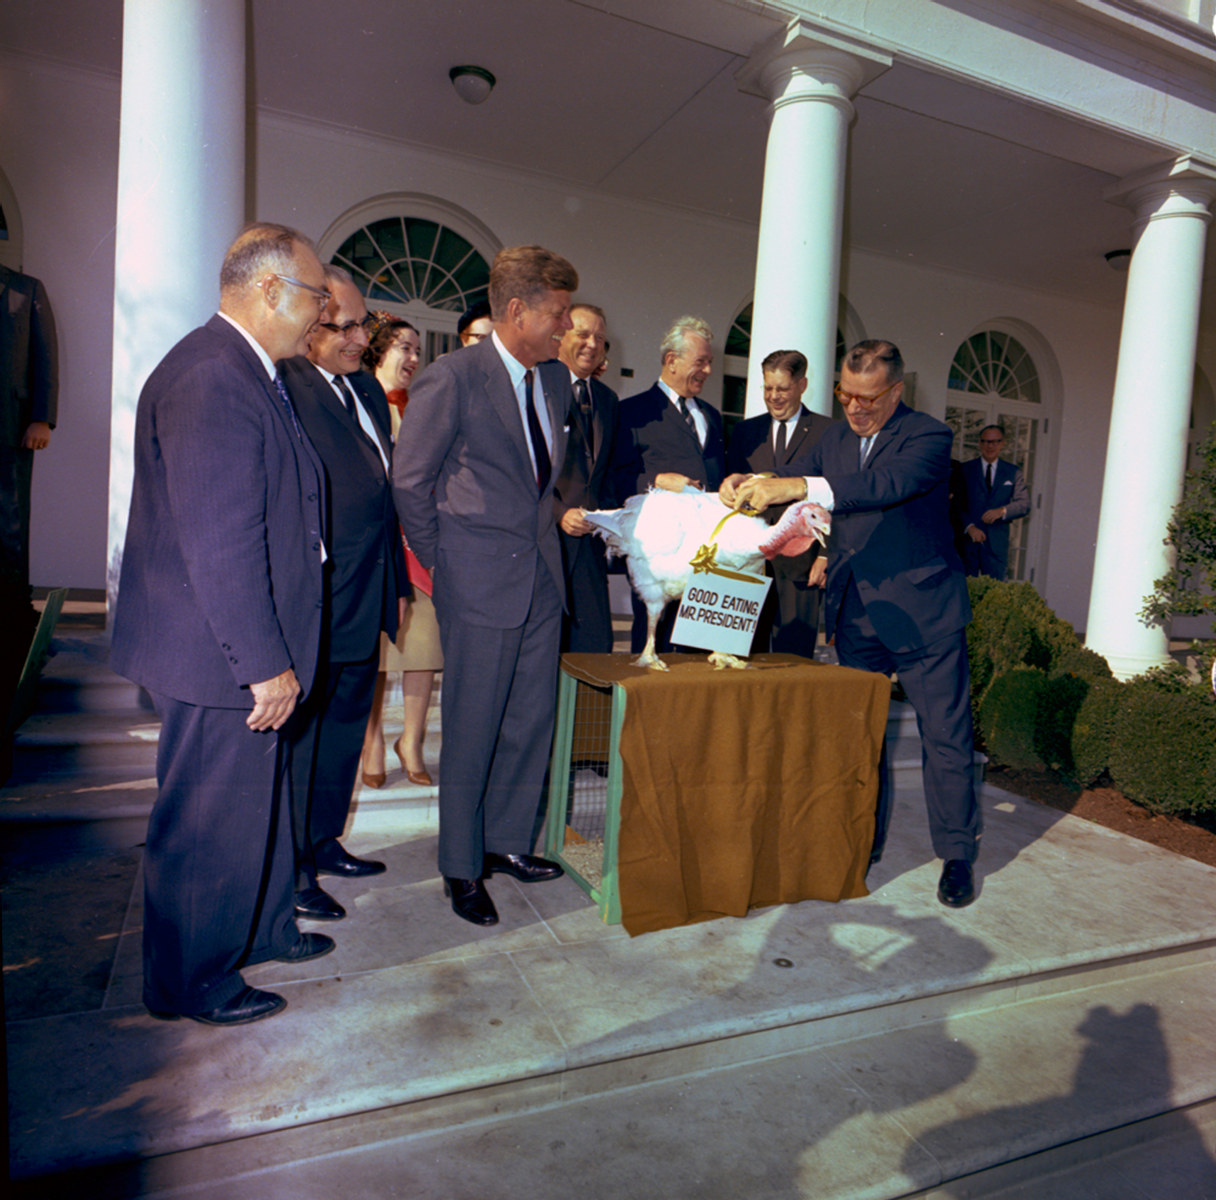 President John F. Kennedy pardoned a turkey on November 19, 1963, stating "Let's Keep him going."  John F. Kennedy Presidential Library and Museum/NARA